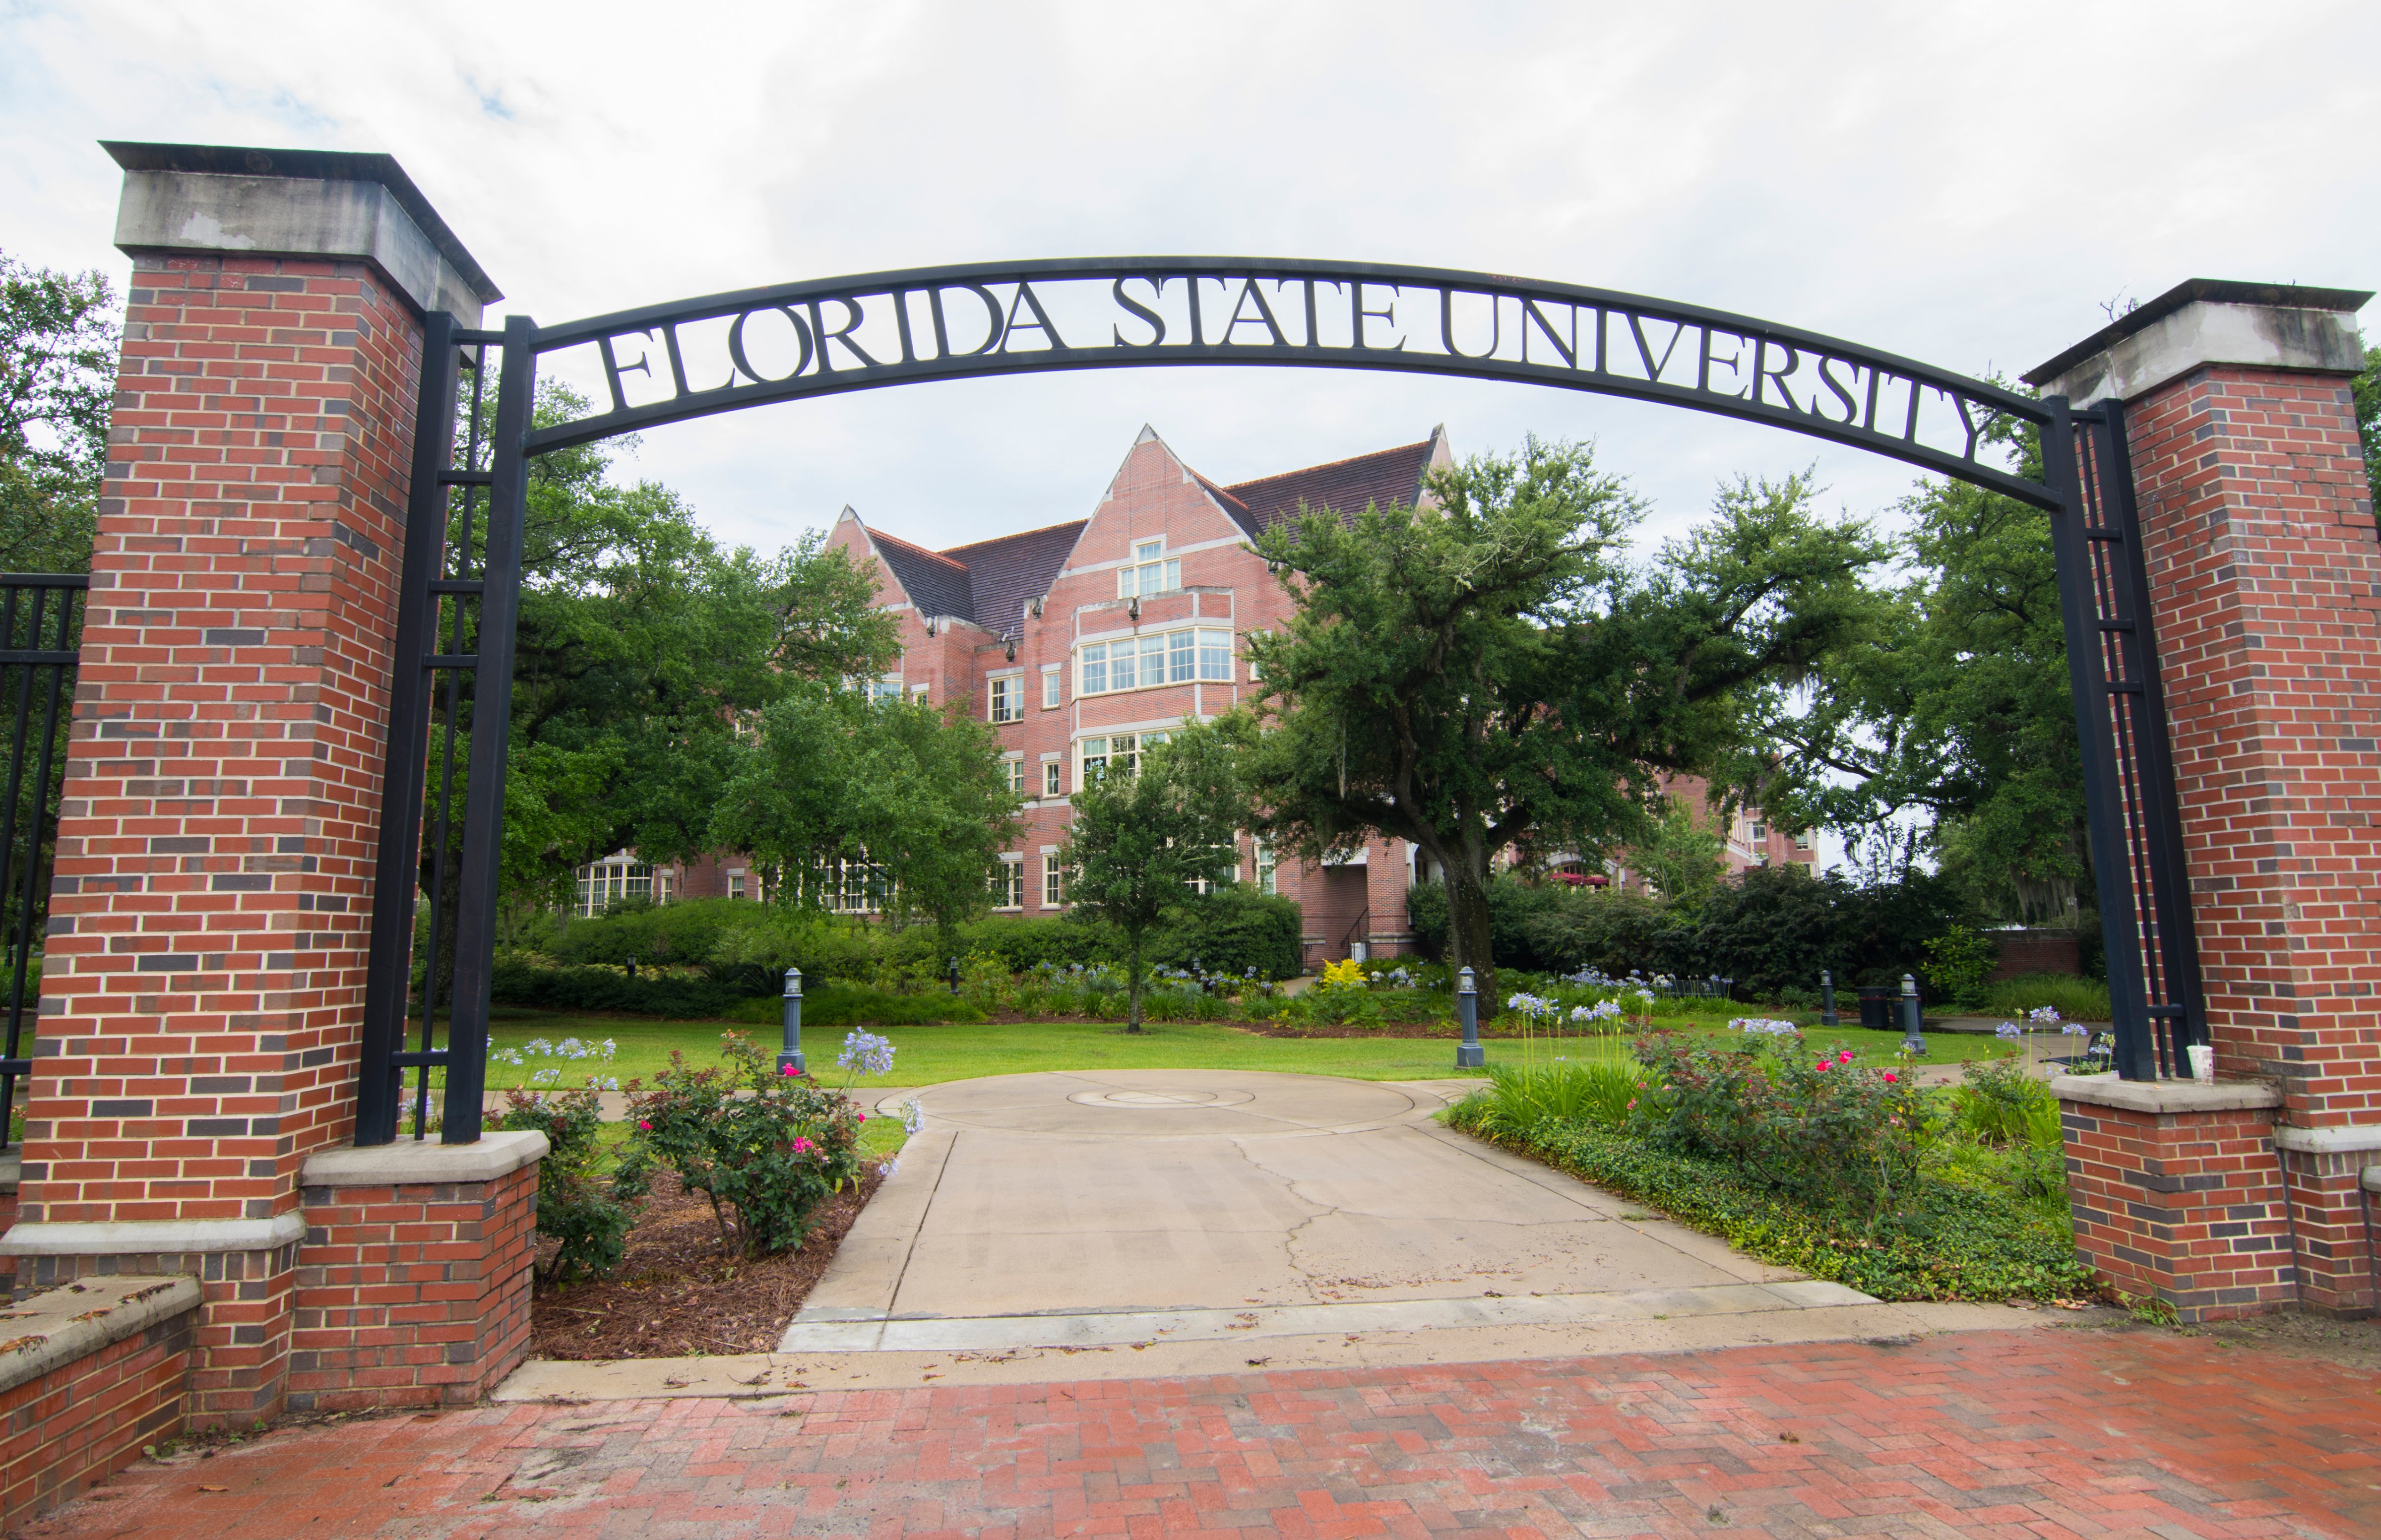 Florida State University entrance in Tallahassee, Fla. (Education Images—UIG/ Getty Images)